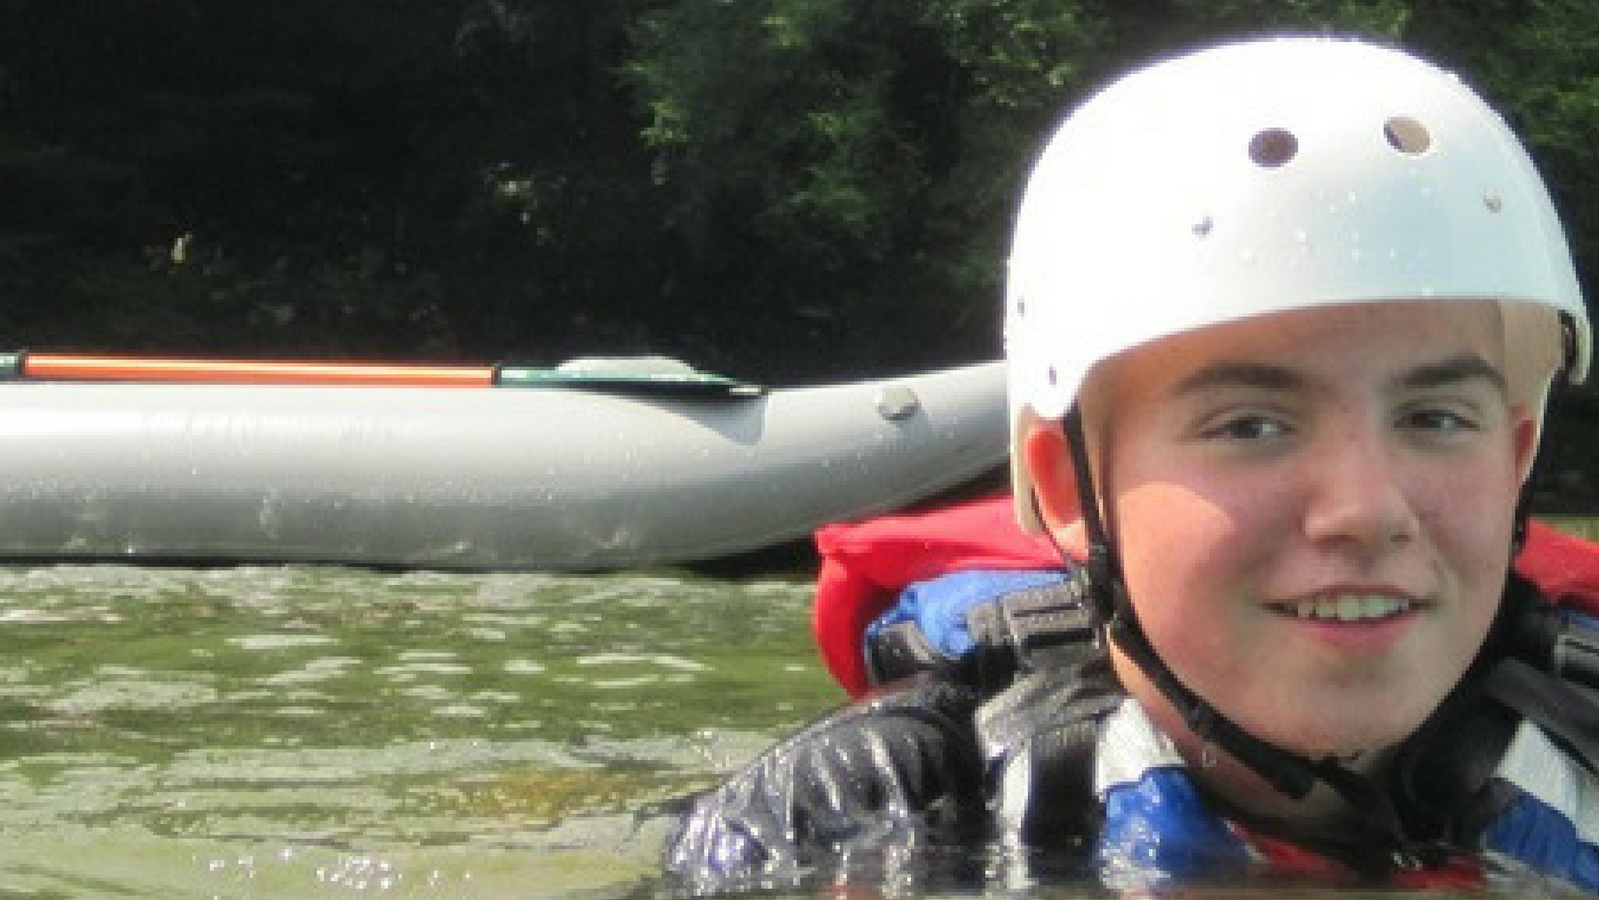 A boy wearing safety gear in a river.